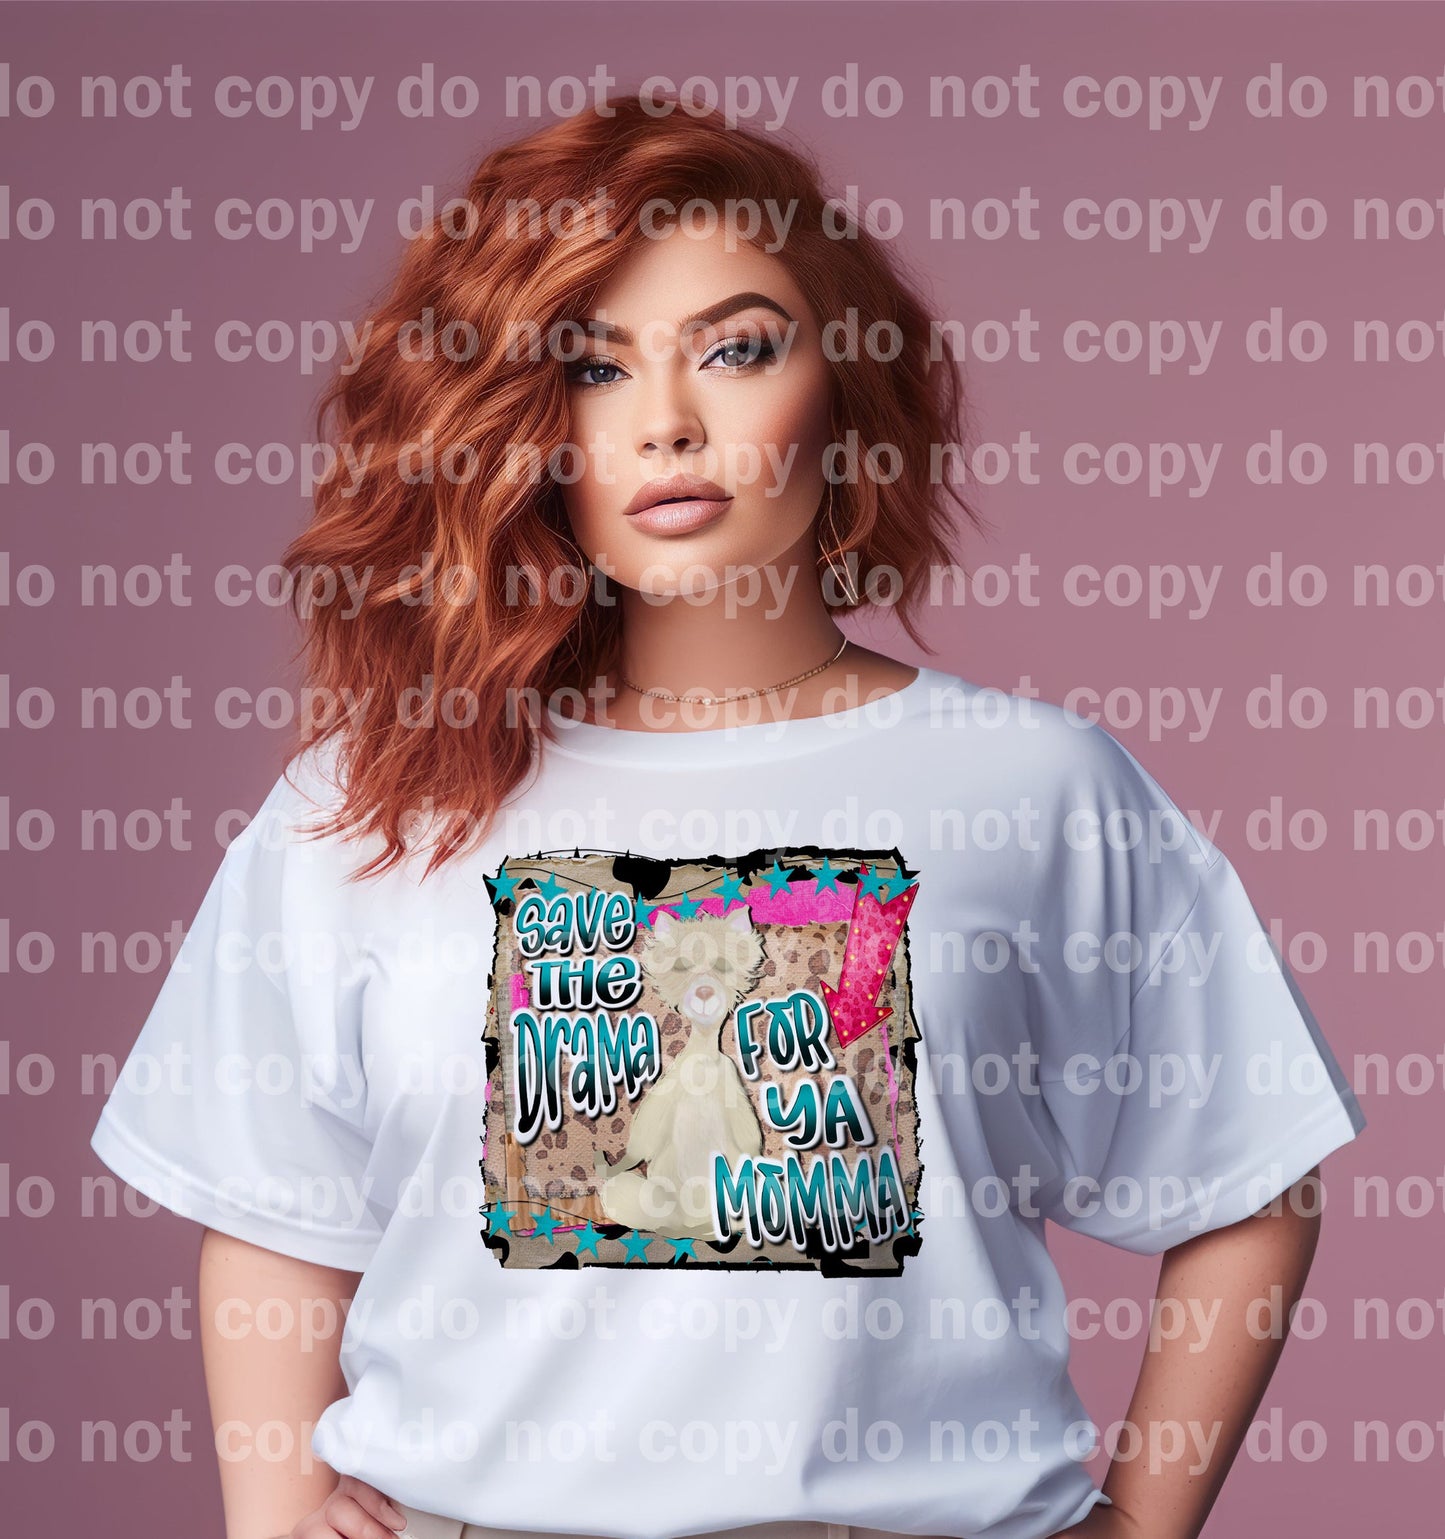 Save The Drama For Ya Momma Dream Print or Sublimation Print